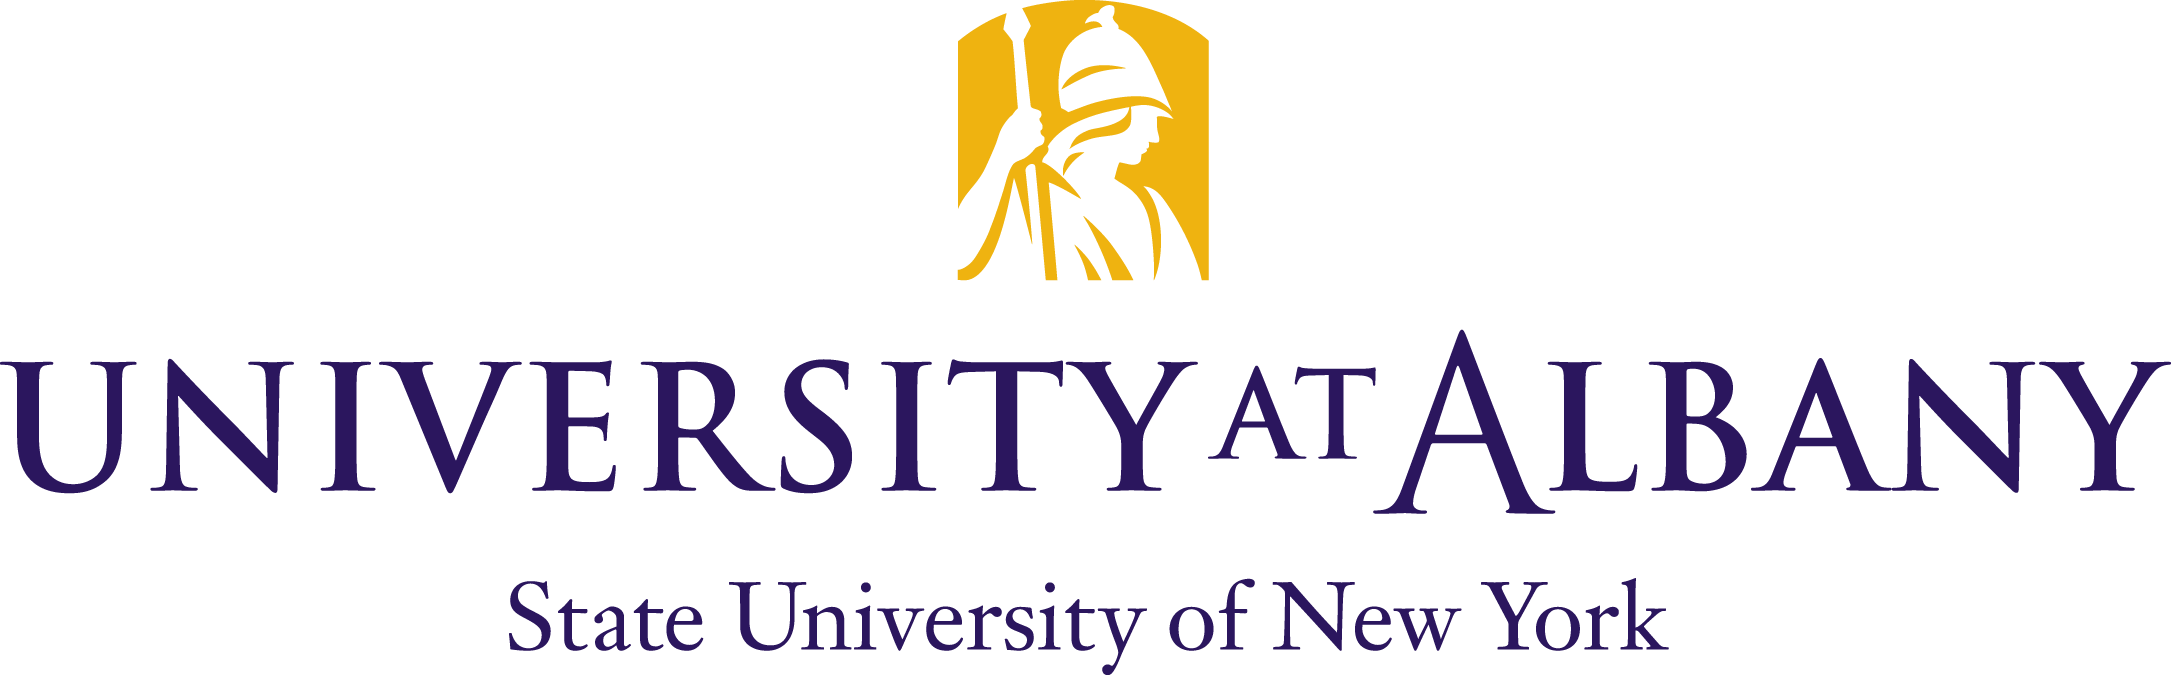 UAlbany Logo - Department of Biological Sciences - University at Albany - SUNY -